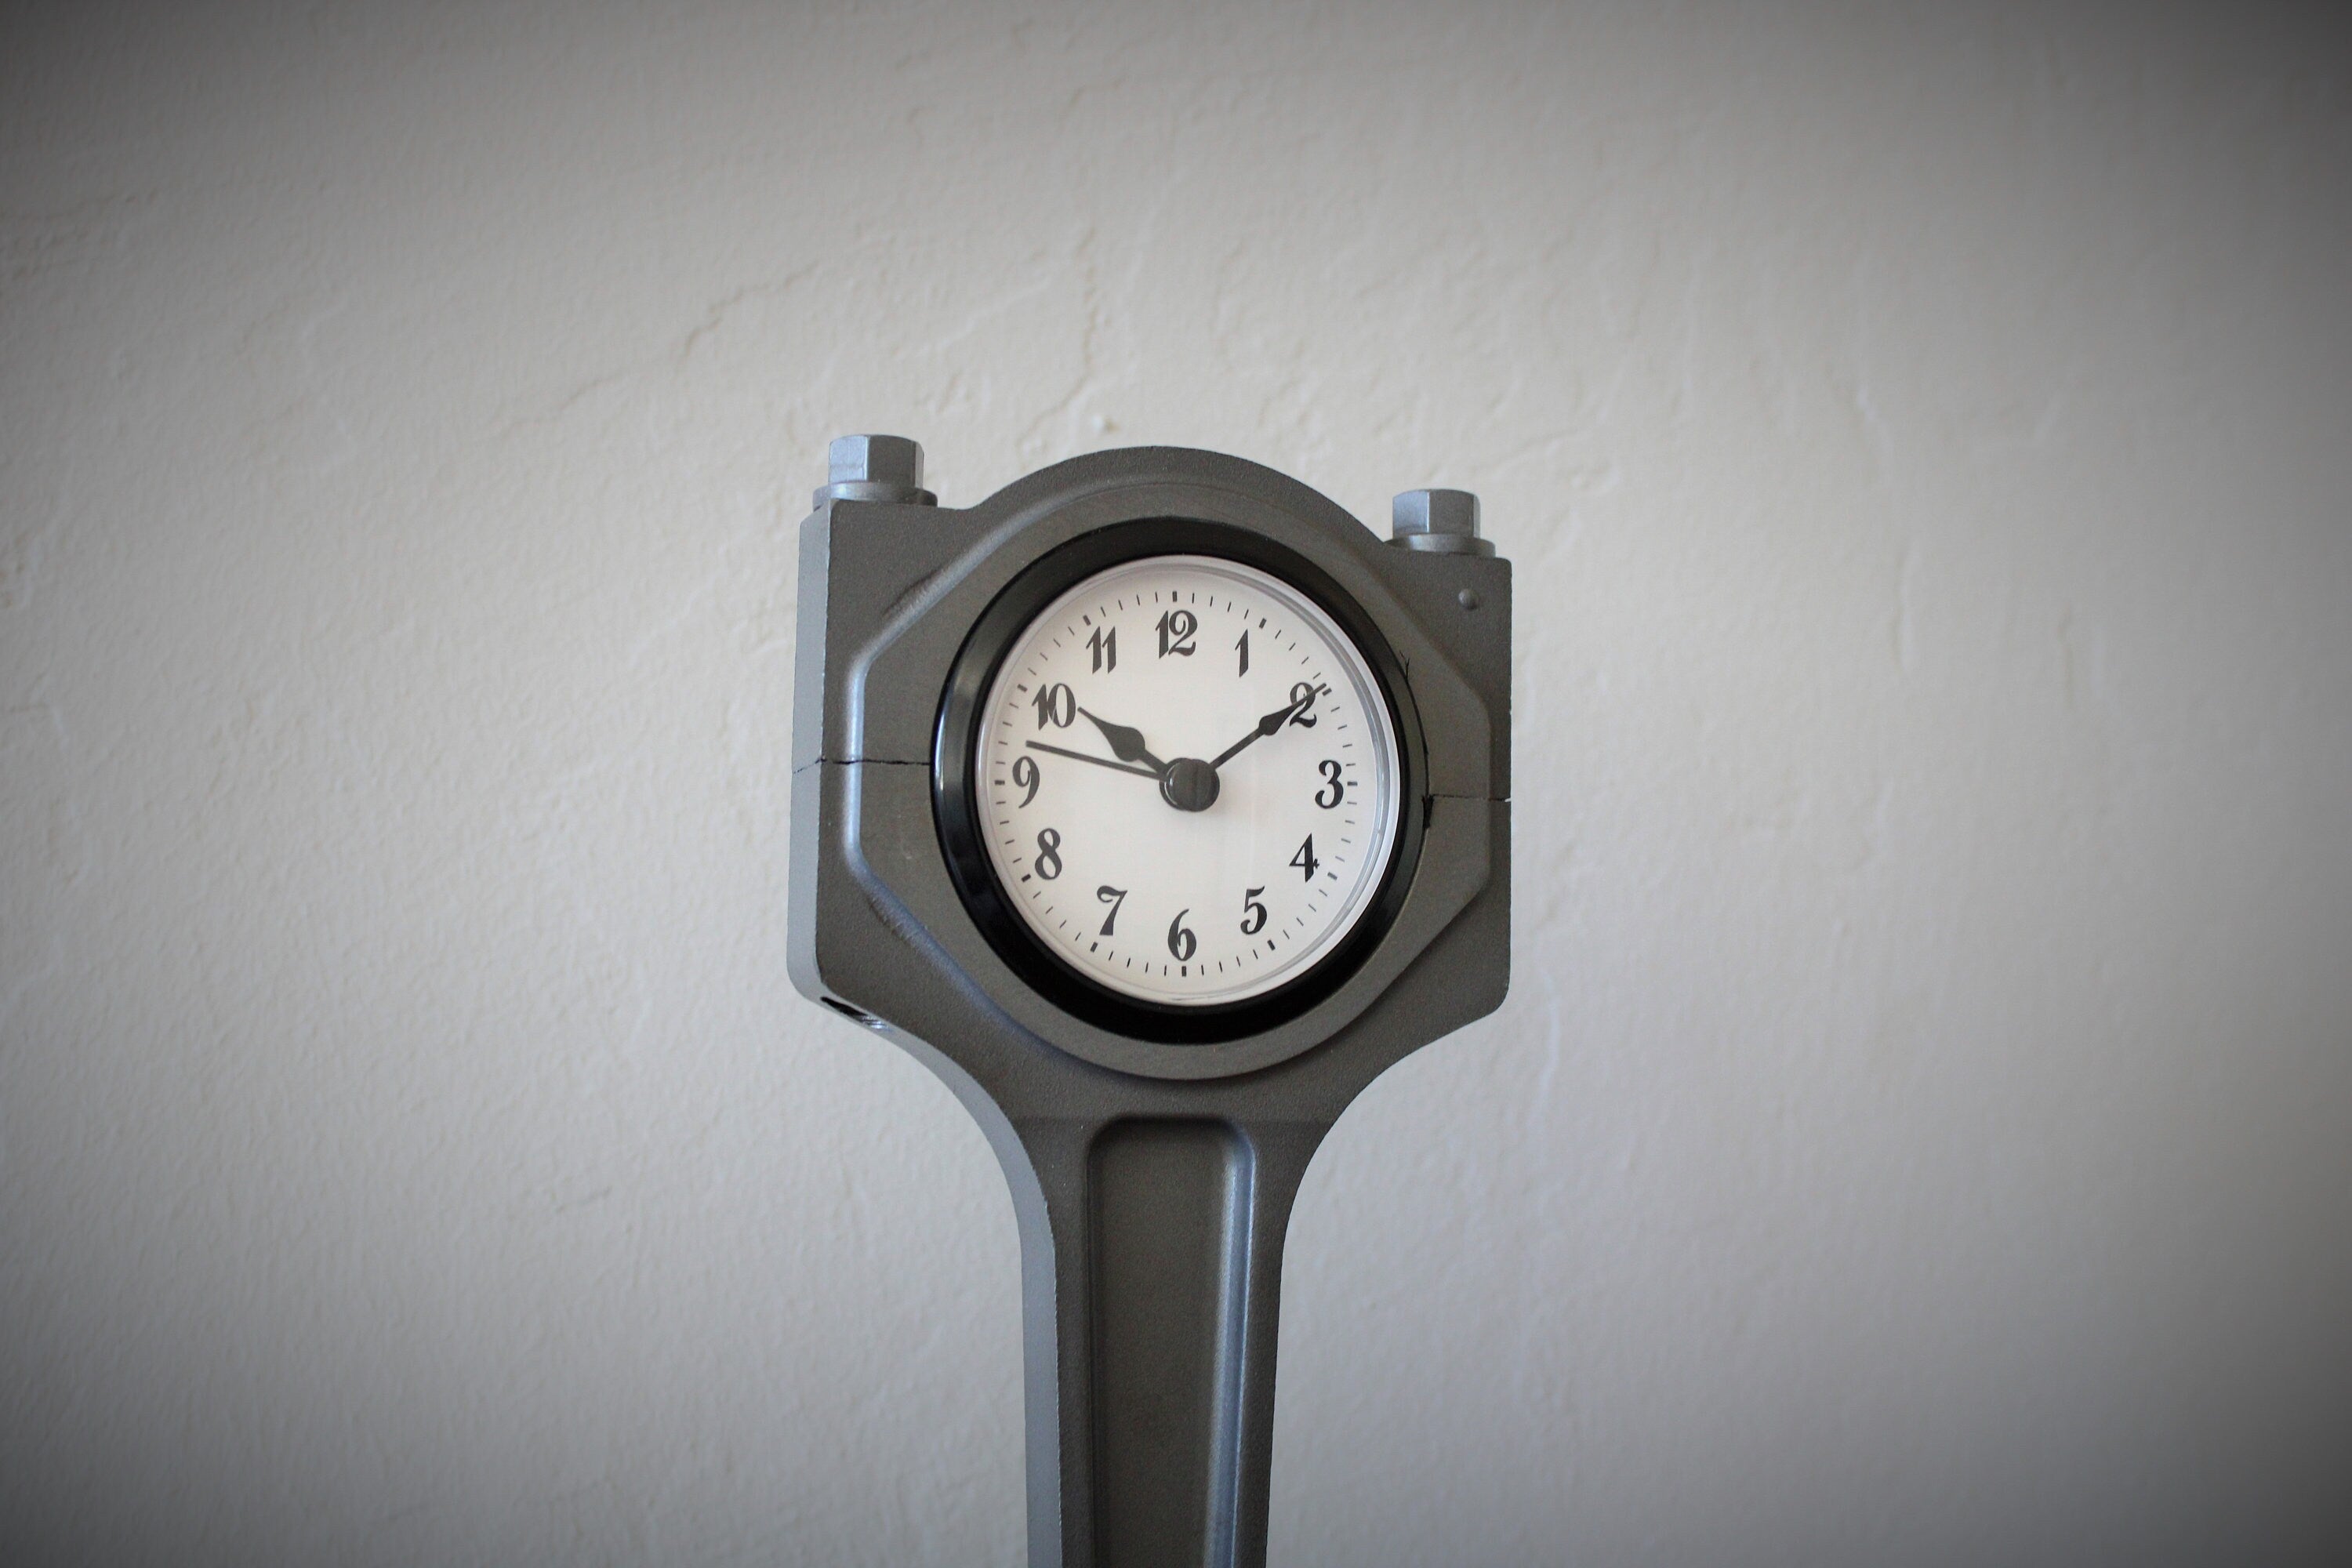 Close-up view of a piston clock made out of a Jaguar car's piston, finished in gunmetal gray.